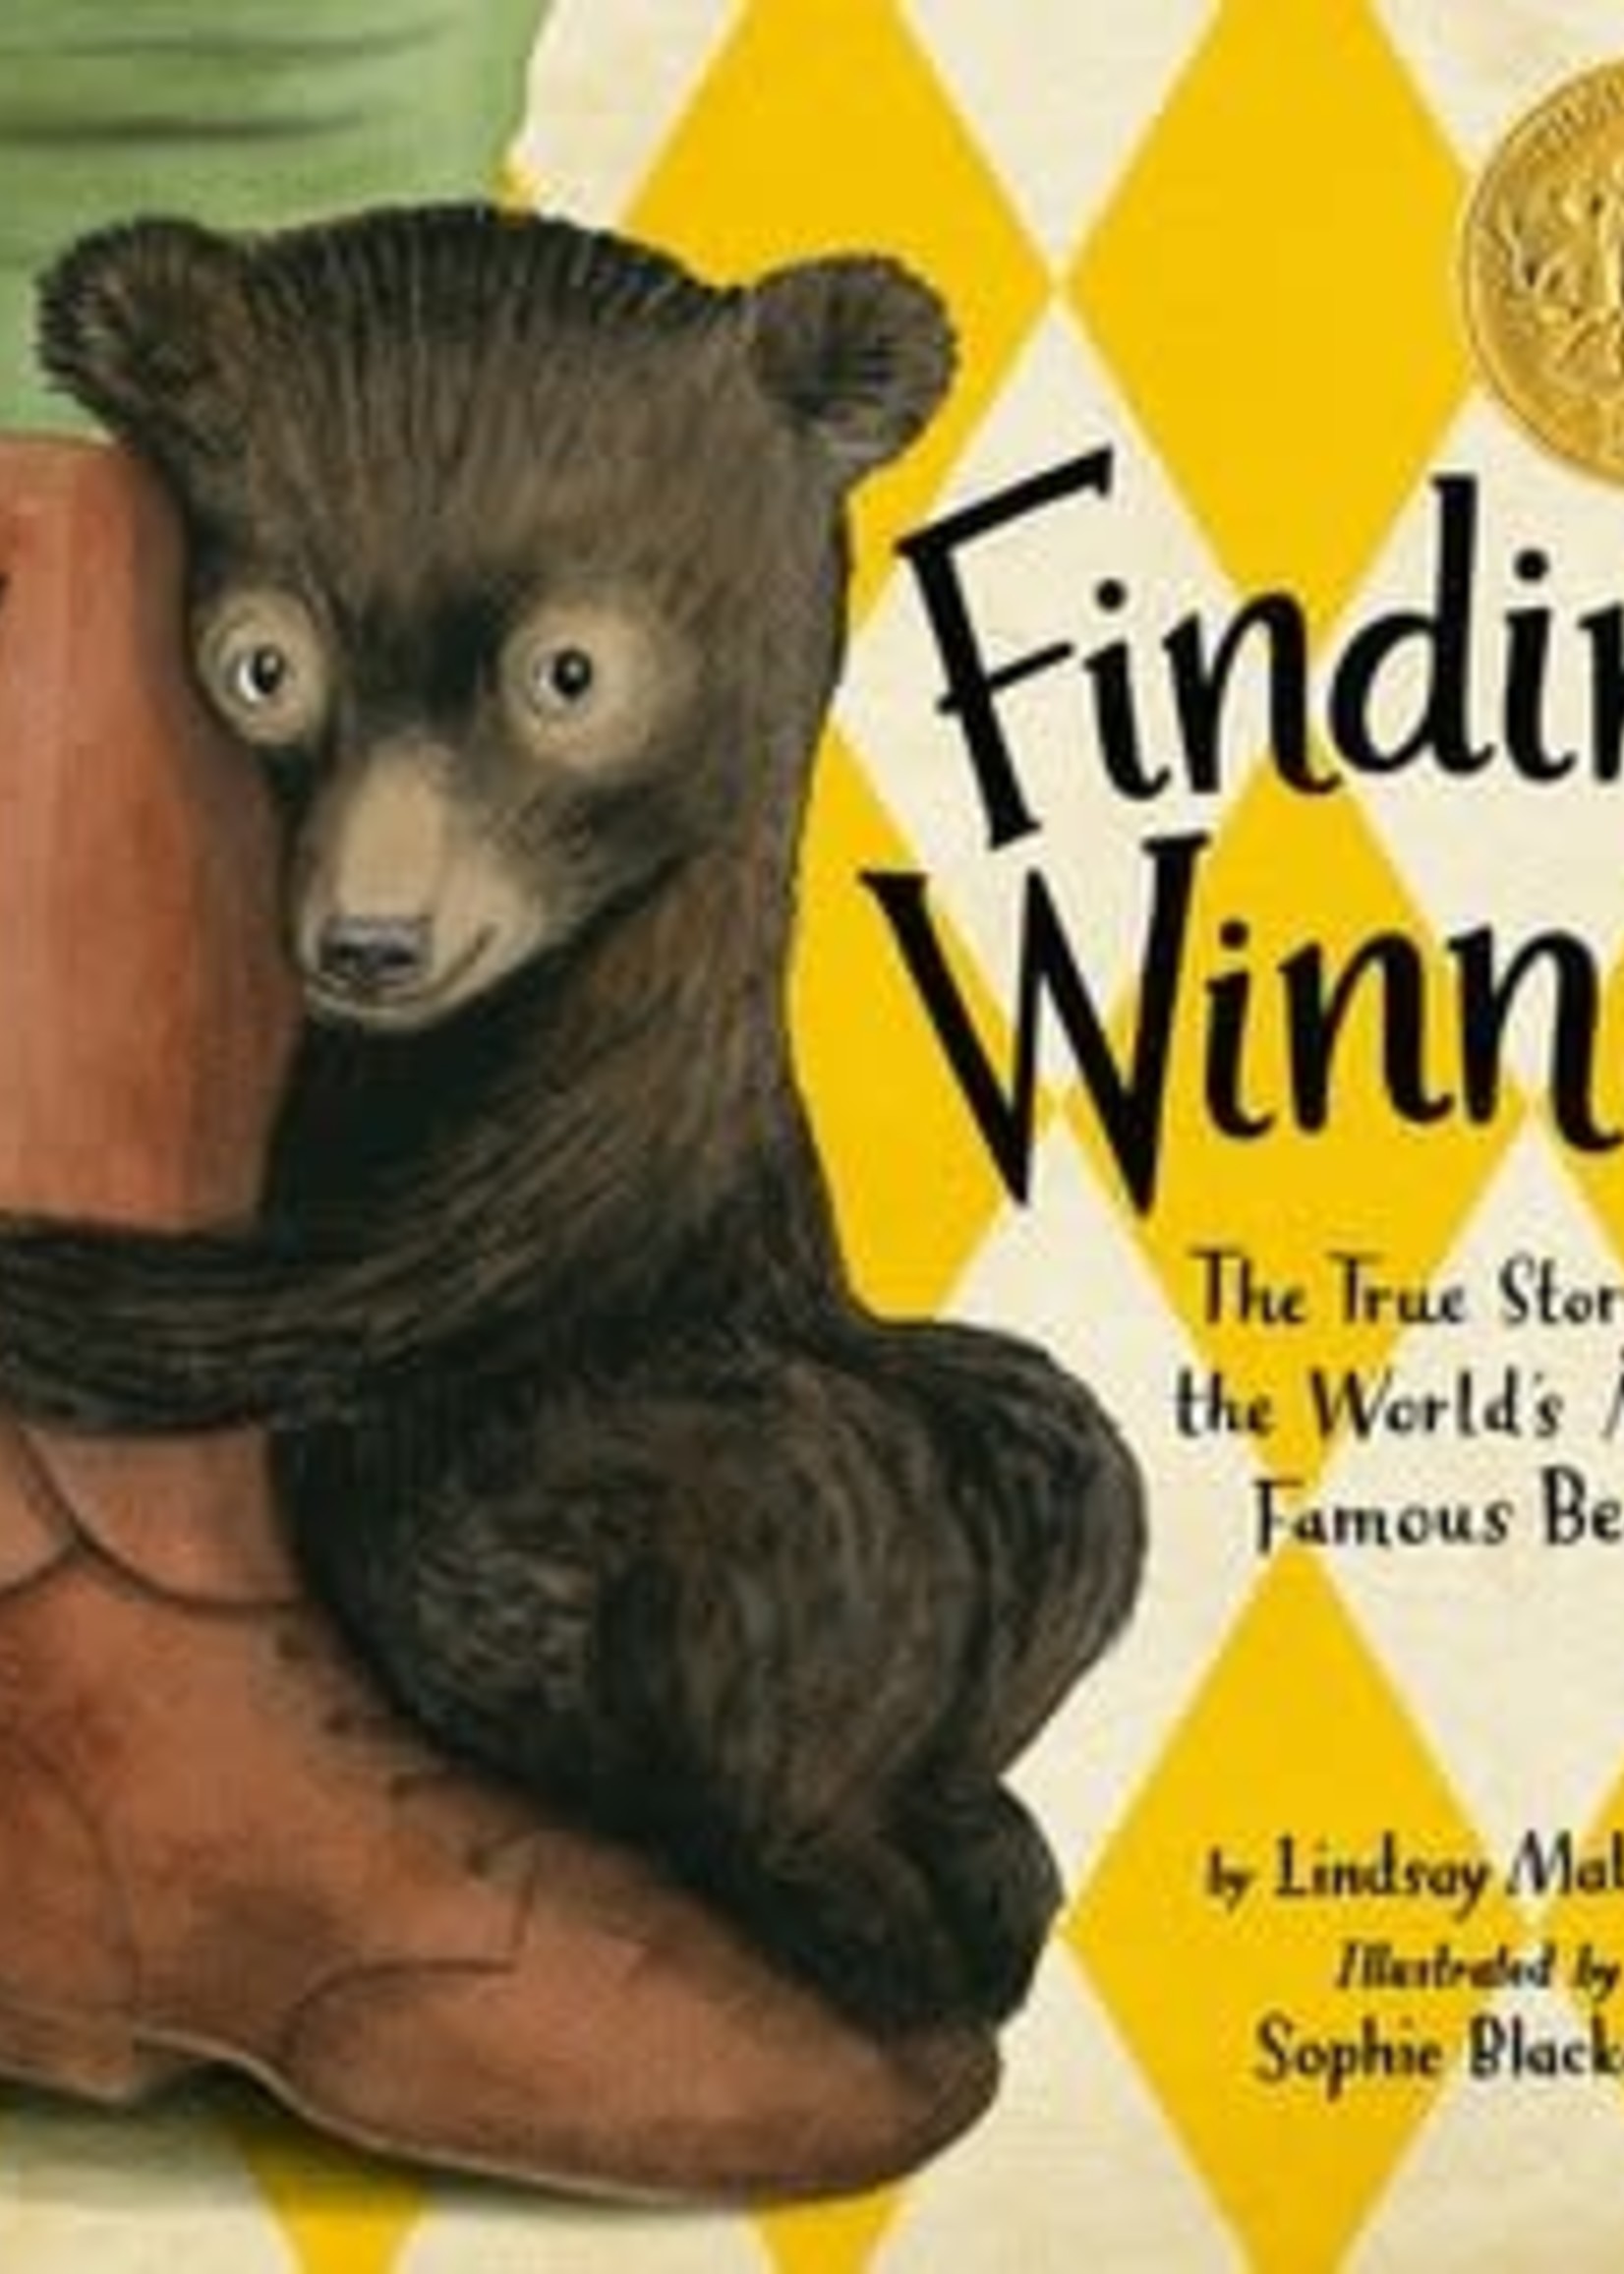 Finding Winnie: The True Story of the World's Most Famous Bear by Lindsay Mattick, Sophie Blackall